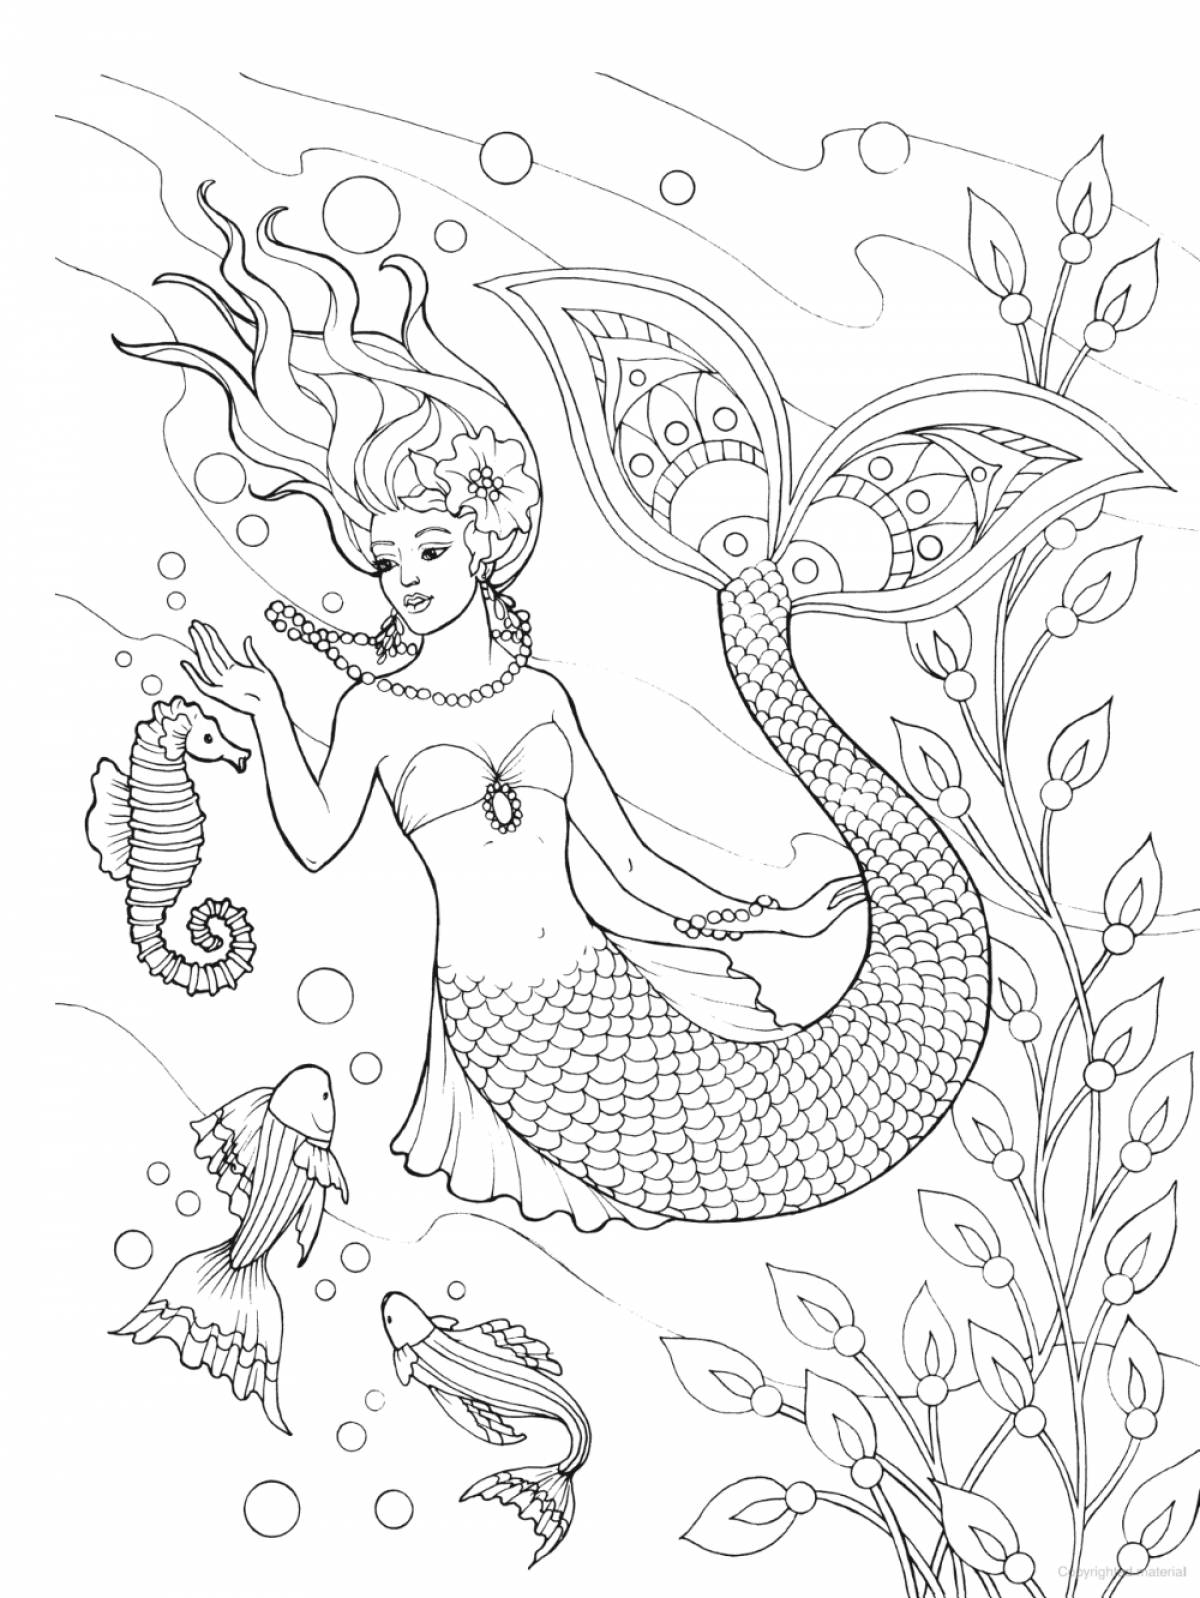 Violent coloring drawing of a mermaid